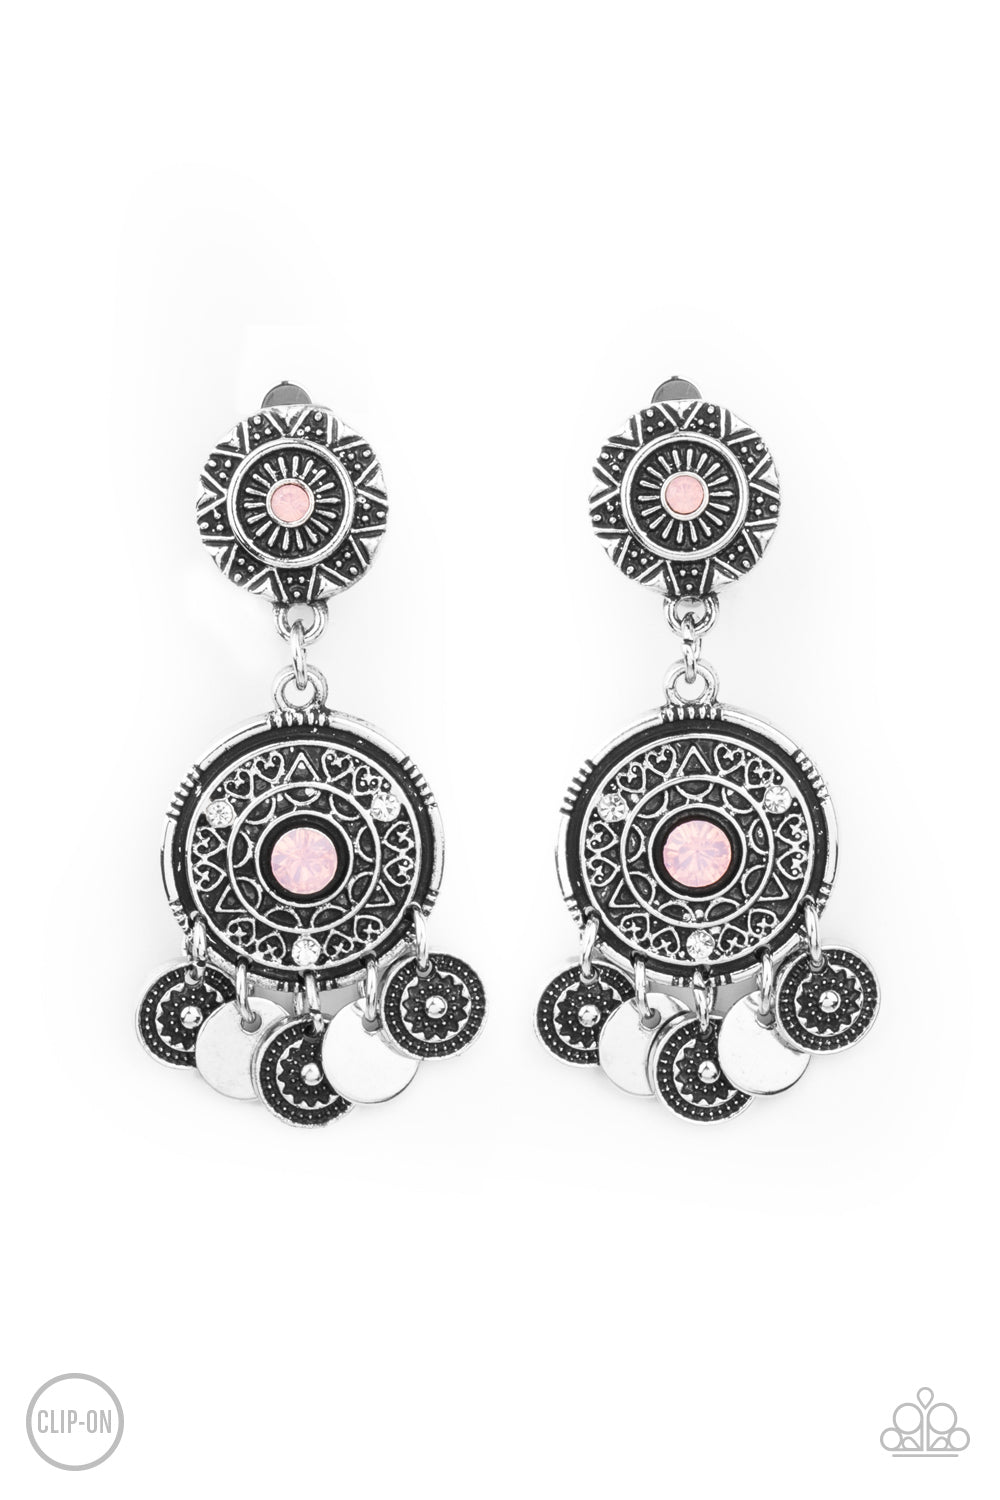 A DREAMCATCHER Come True - Pink Floral - Silver Clip On Earrings - Paparazzi Accessories - 
Dainty silver discs and antiqued floral frames dance from the bottom of an ornately embossed silver frame that links to a matching silver fitting. Both frames are dotted in pink opalescent rhinestone centers, while the largest of frames is sprinkled in dainty white rhinestone accents for a dreamy finish. Earring attaches to a standard clip-on fitting.
